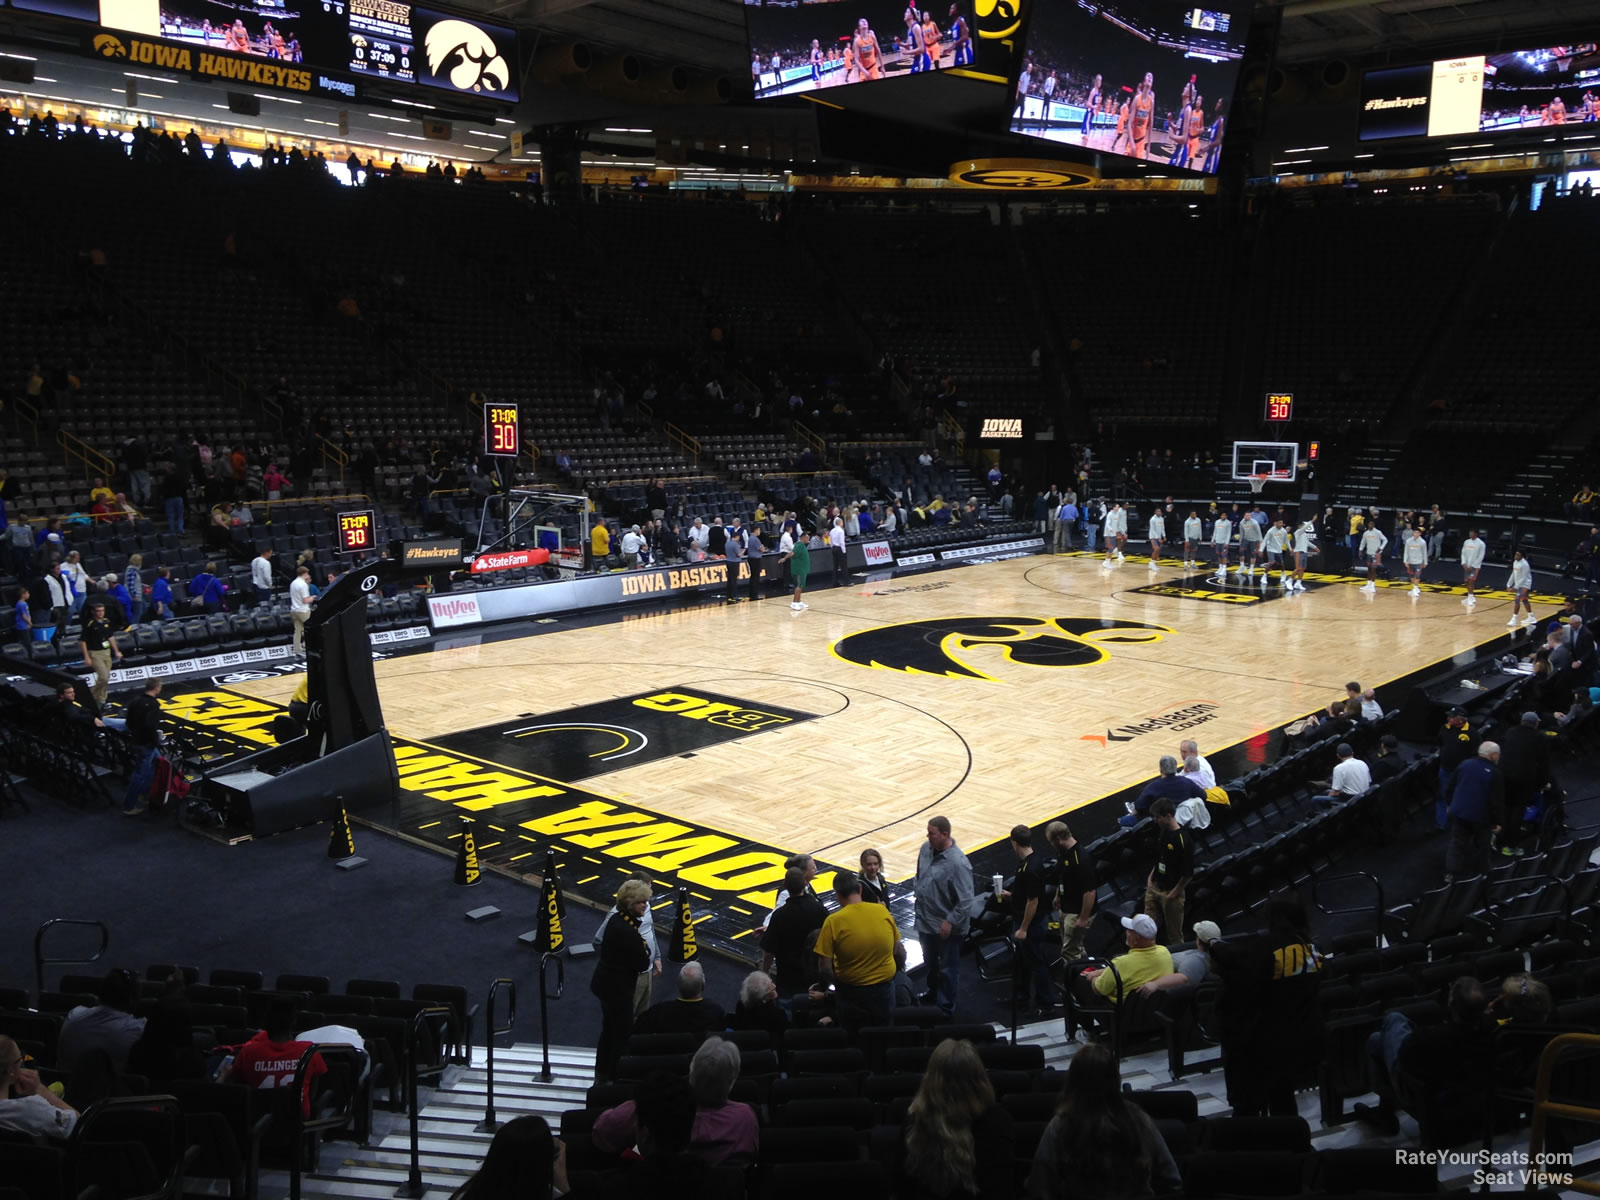 section k, row 15 seat view  - carver-hawkeye arena